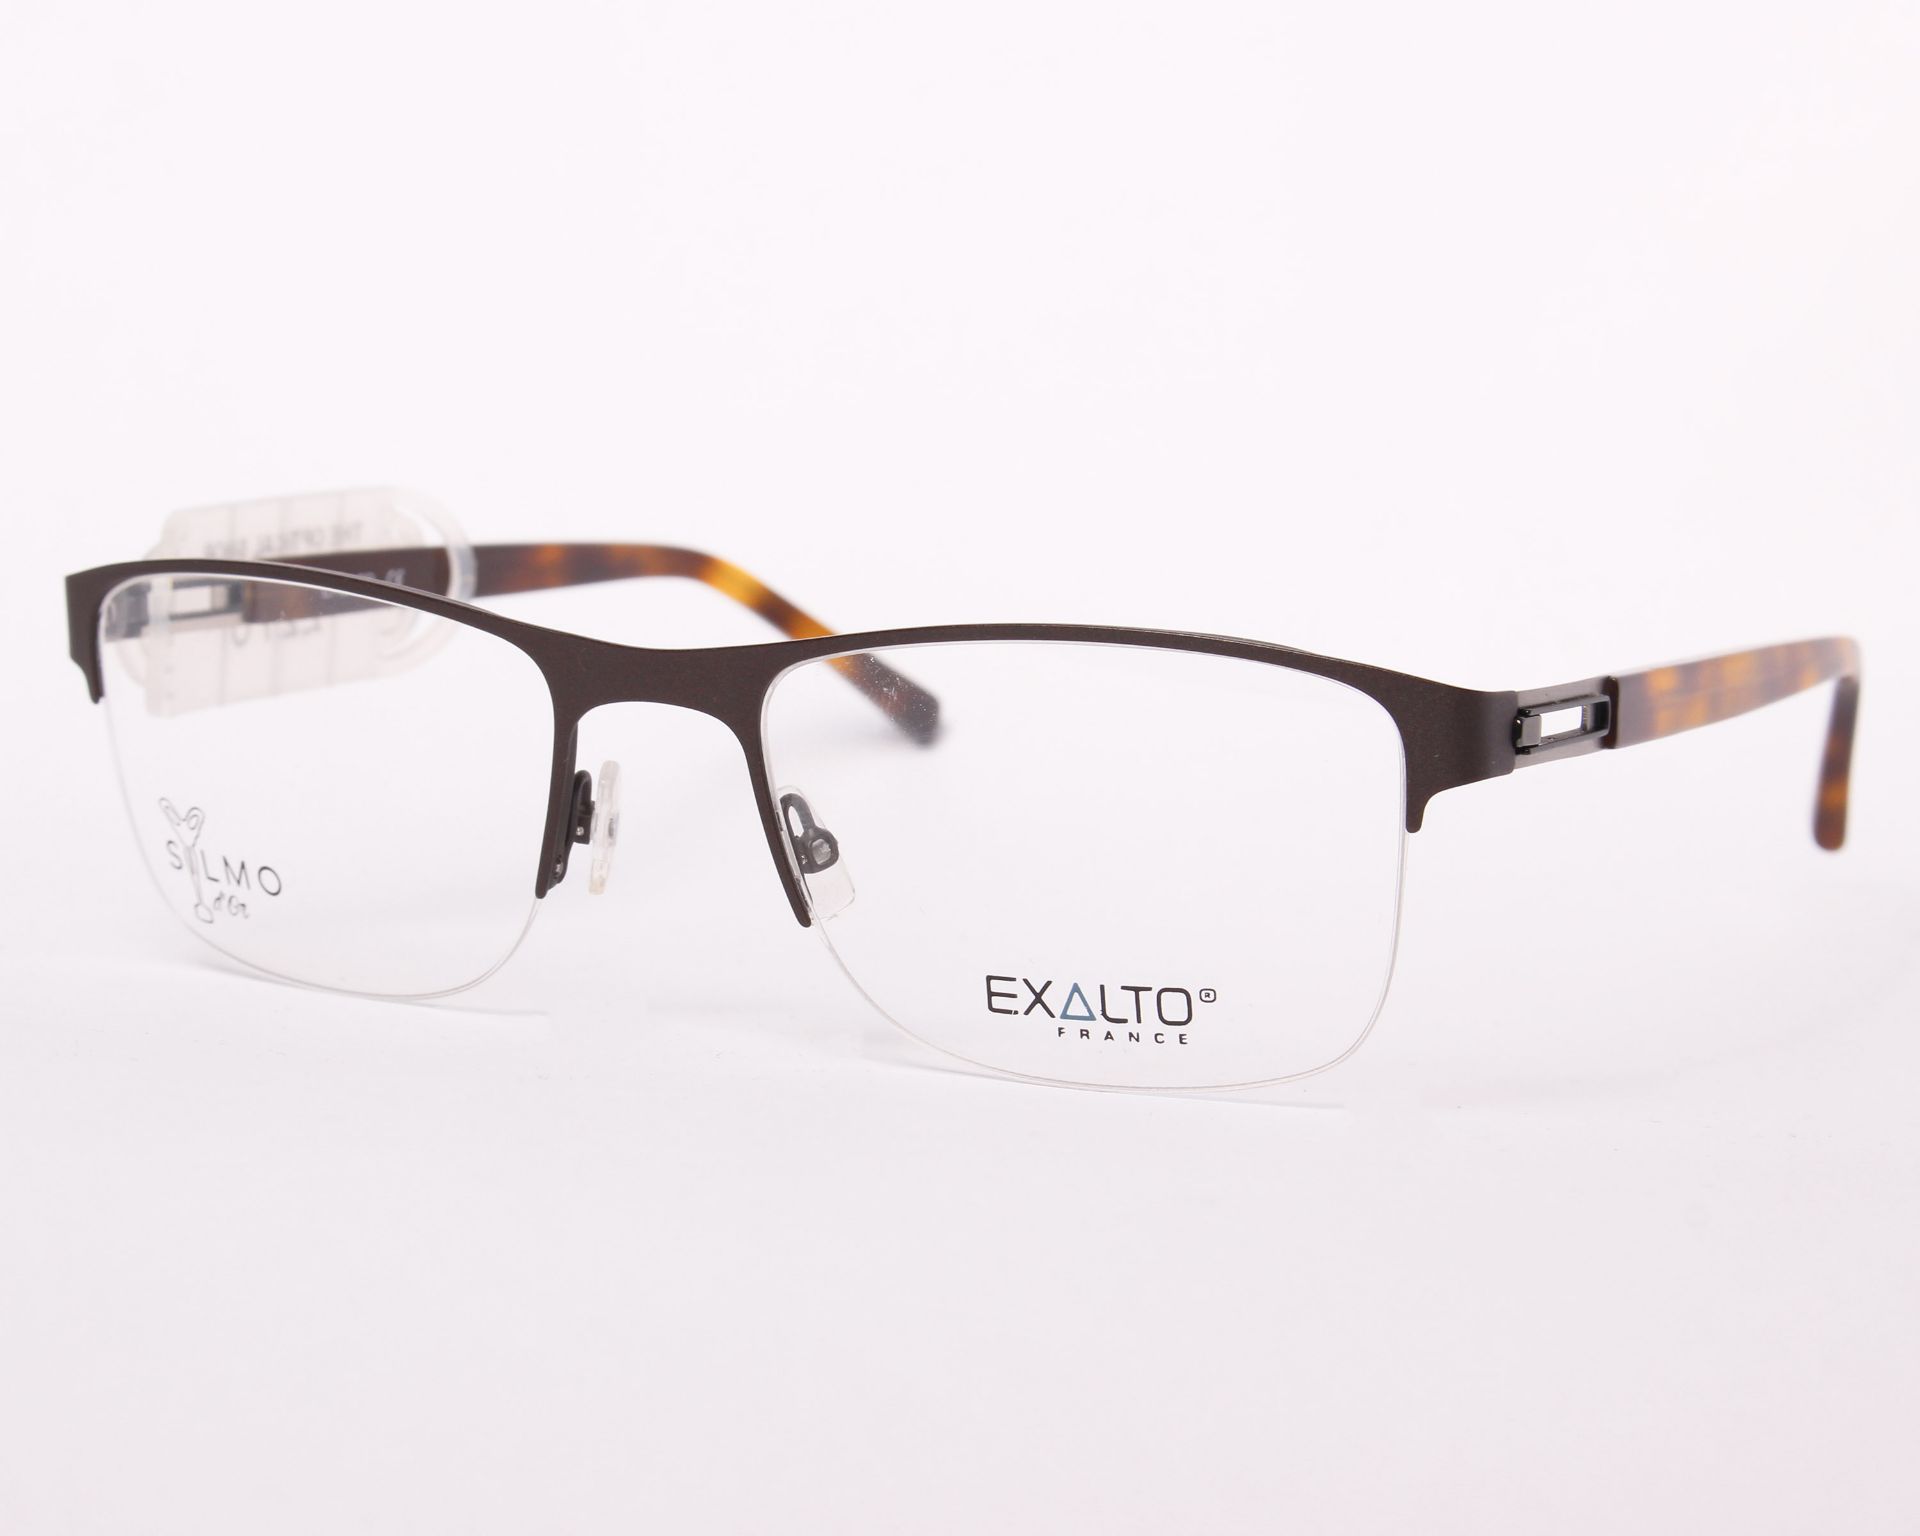 A pair of as new Exalto glasses frames with clear glass (RRP £270).